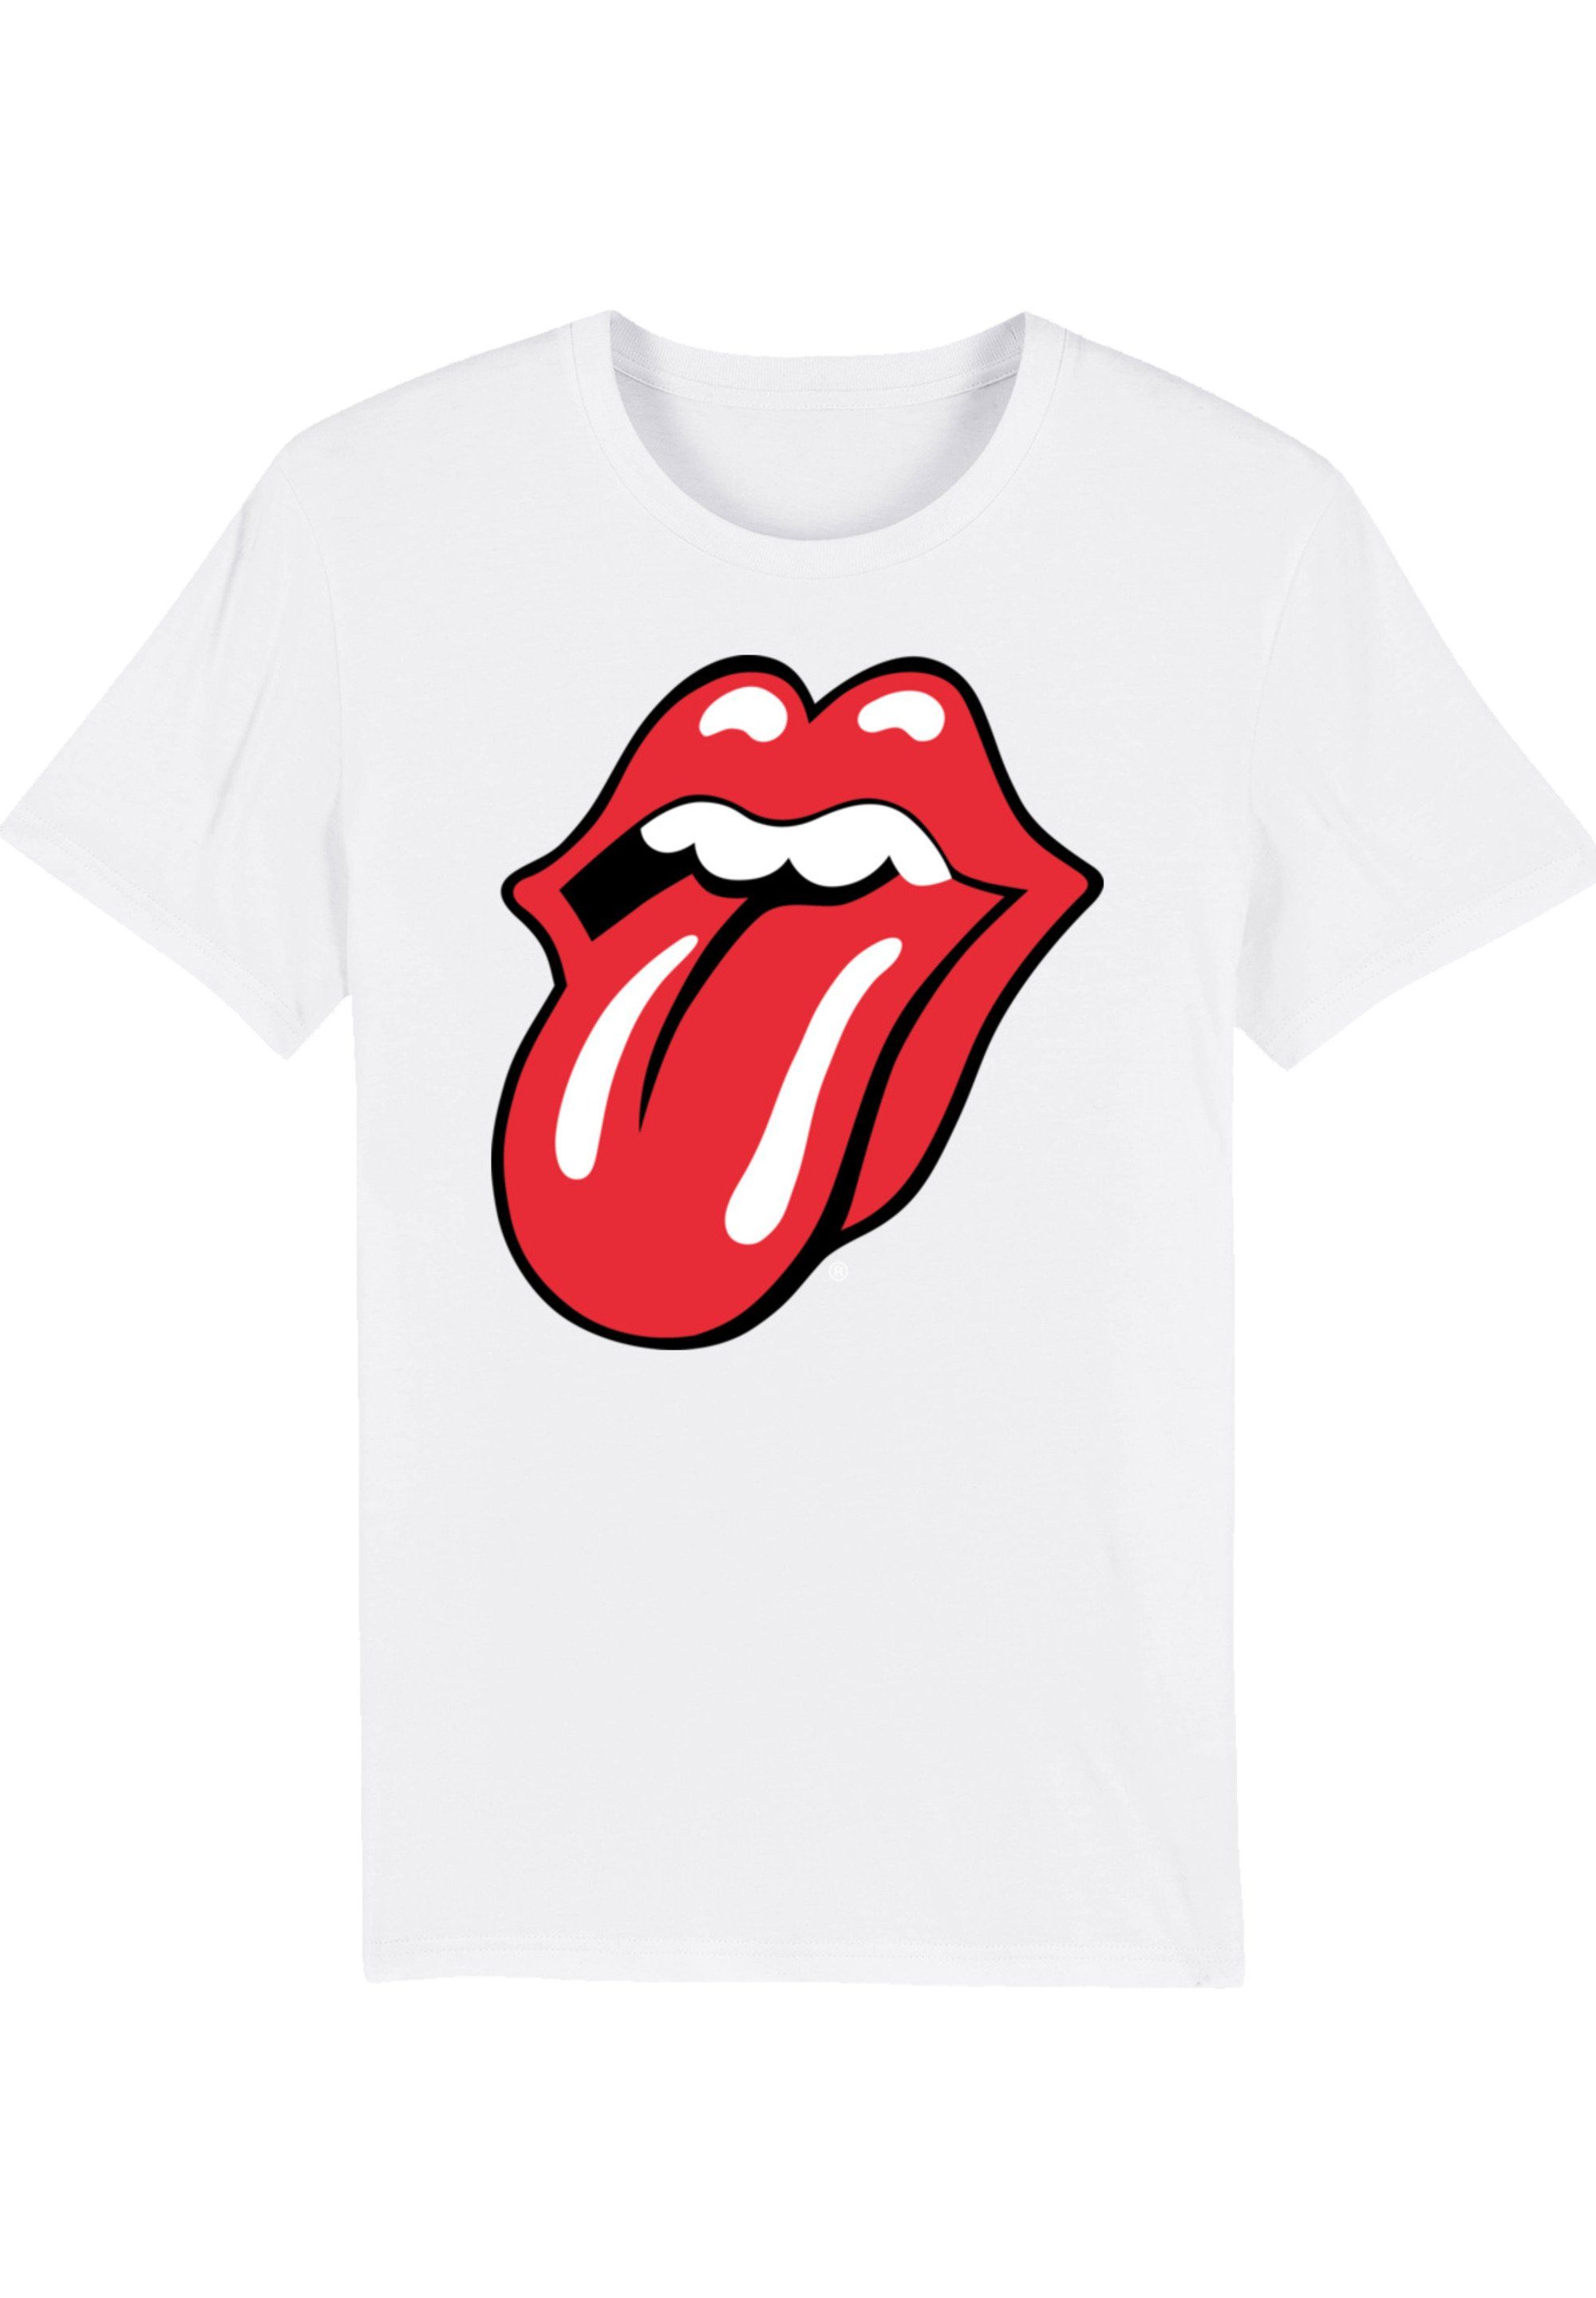 F4NT4STIC T-Shirt The weiß Rote Rolling Print Stones Zunge